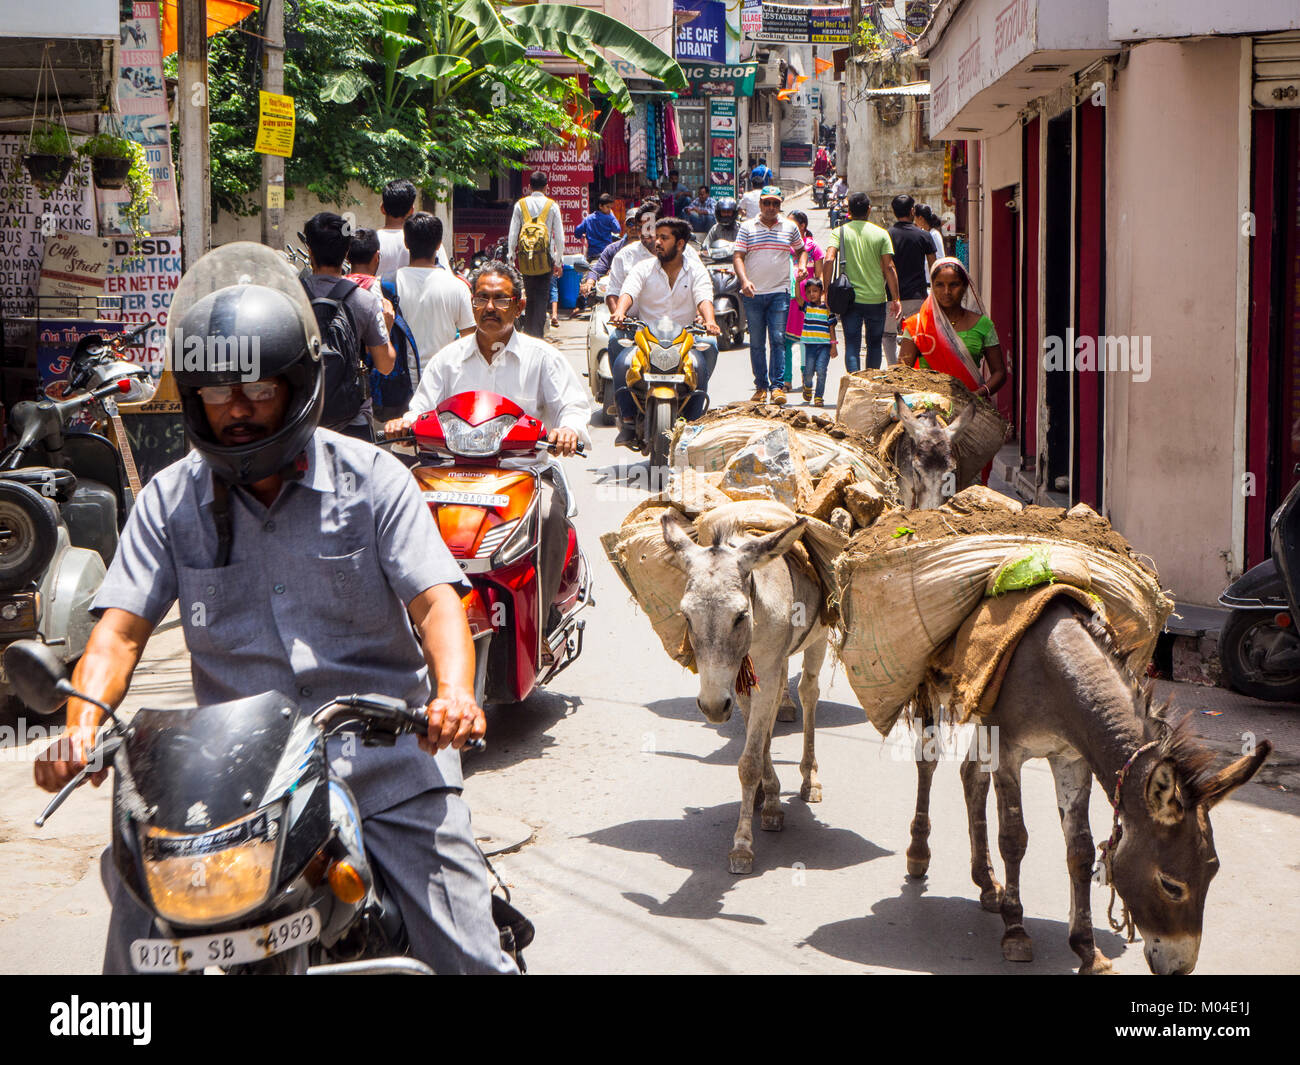 A colorful photograph of everyday life in an Indian city - the transfer of building materials by using donkeys Stock Photo